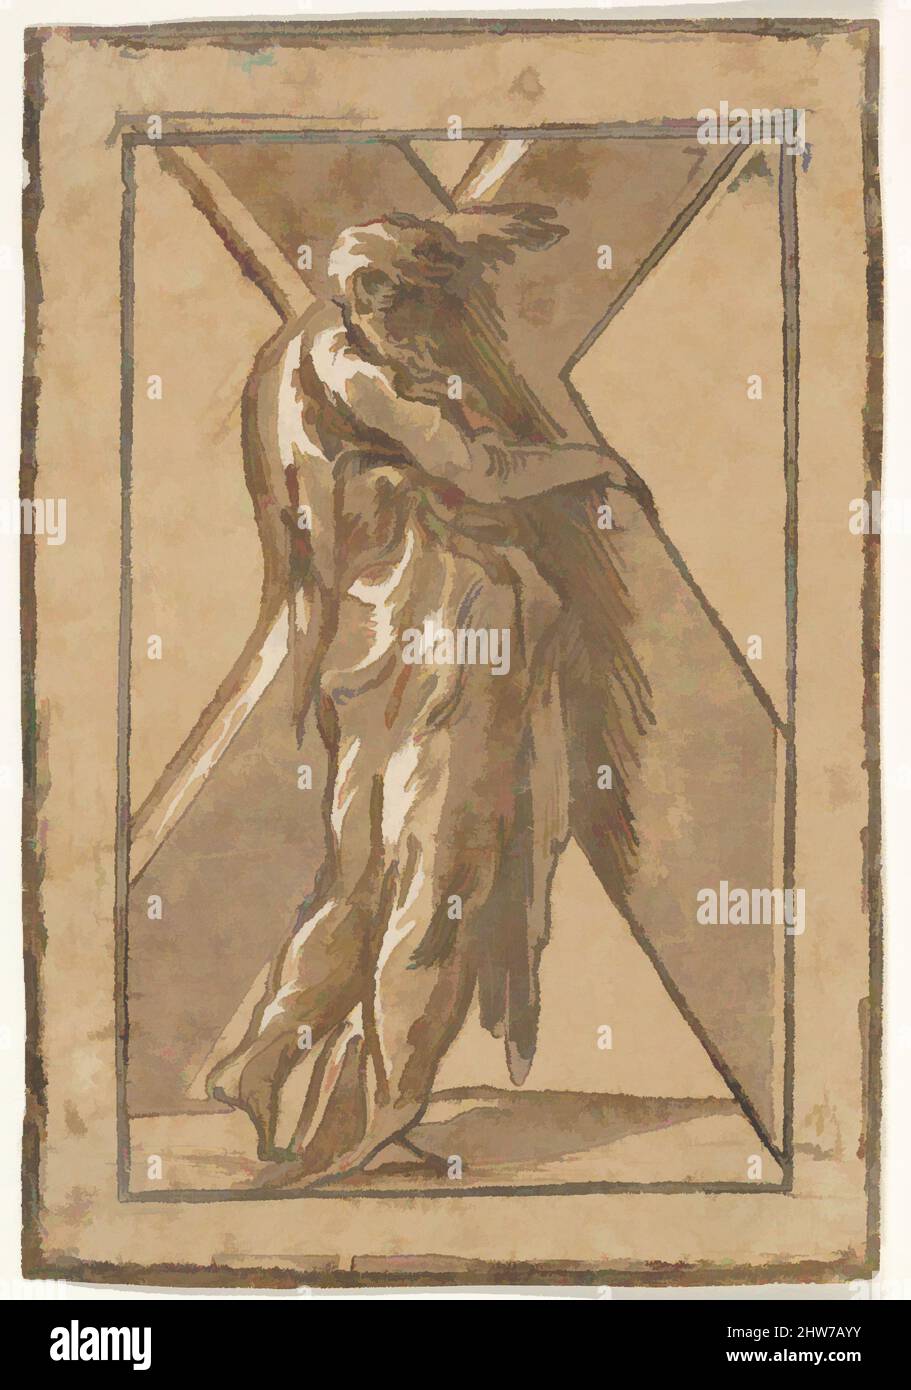 Art inspired by St. Andrew standing in profile view and grasping a monumental cross, chiaroscuro woodcut in green and brown, from a series of twelve apostles after Parmigianino, ca. 1520–50, Chiaroscuro woodcut, sheet: 5 13/16 x 3 15/16 in. (14.7 x 10 cm), Prints, Antonio da Trento (, Classic works modernized by Artotop with a splash of modernity. Shapes, color and value, eye-catching visual impact on art. Emotions through freedom of artworks in a contemporary way. A timeless message pursuing a wildly creative new direction. Artists turning to the digital medium and creating the Artotop NFT Stock Photo